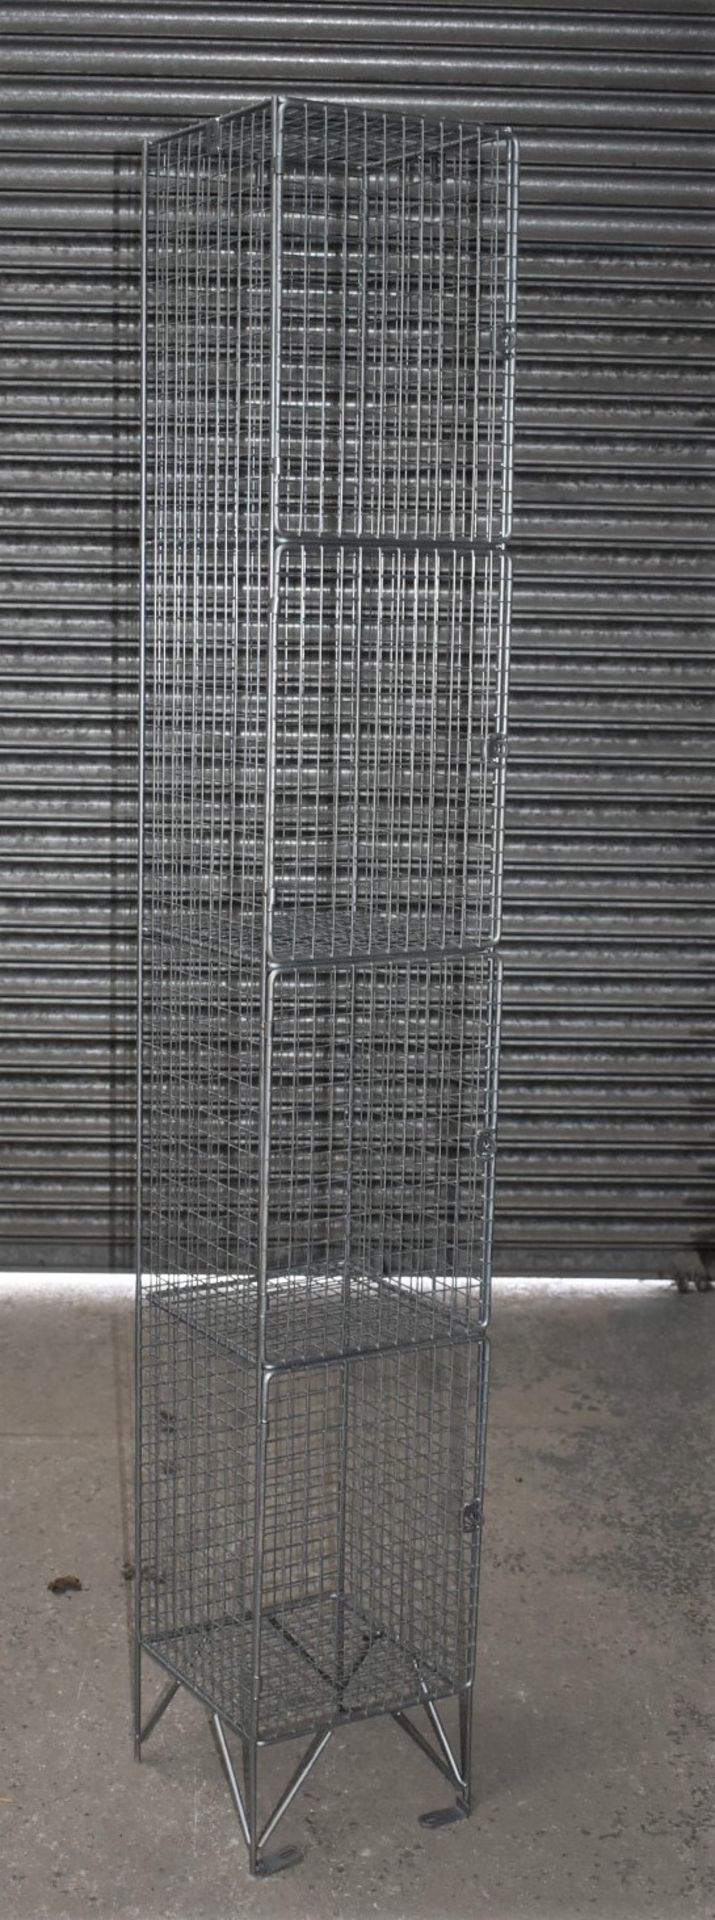 1 x Wire Mesh Cage Lockers With Four Locker Compartments - Dimensions: H193 x W30 x D32 cms - Ref: